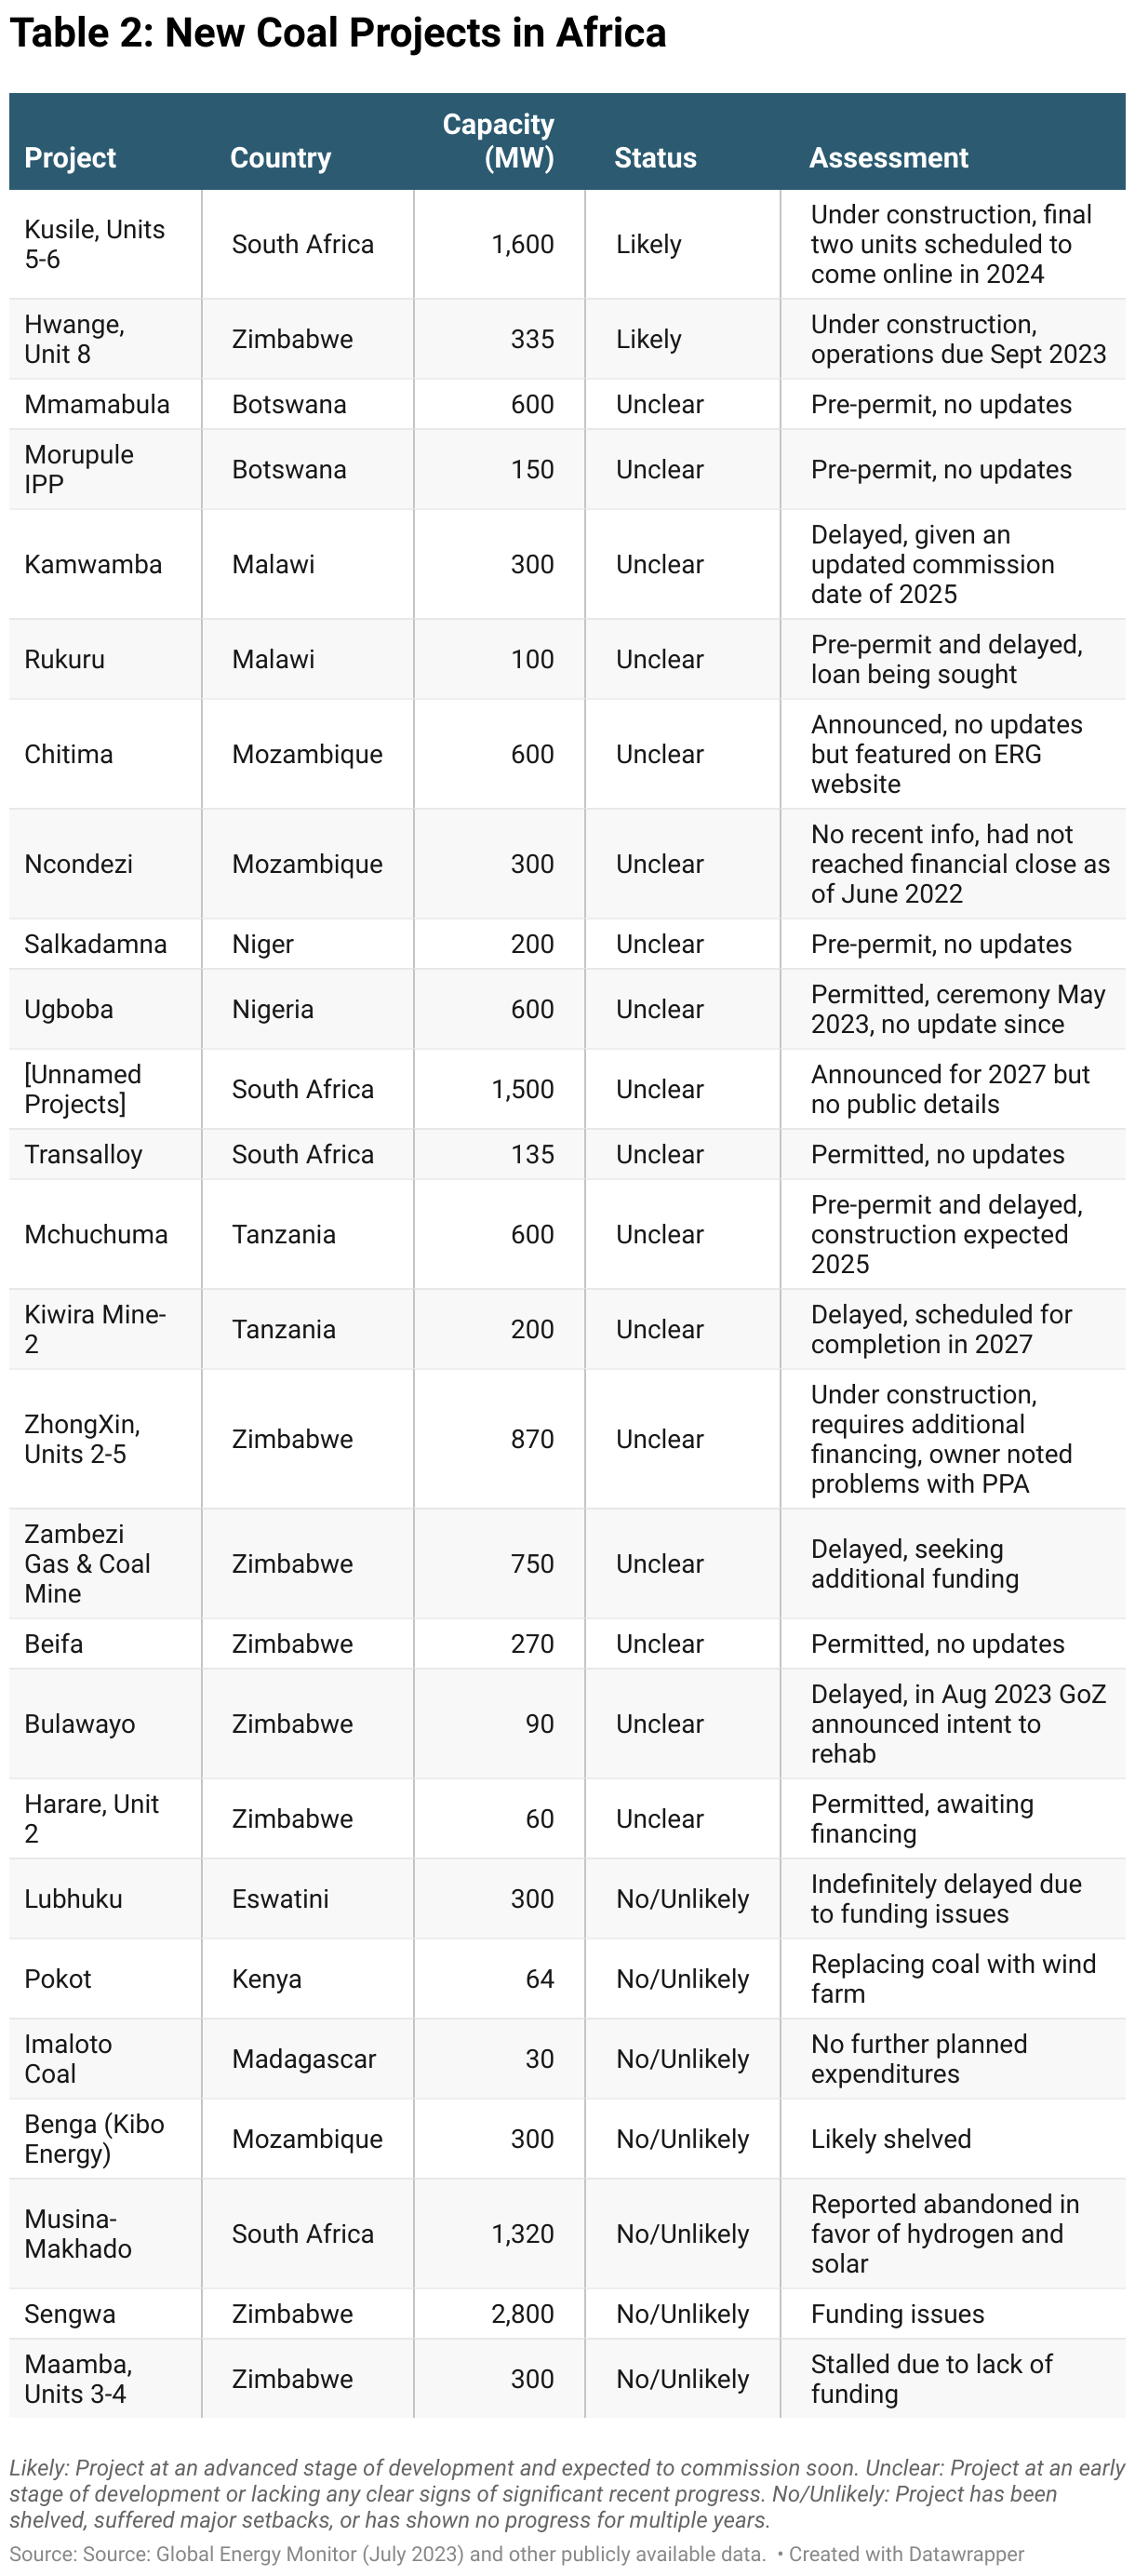 Table showing new coal projects in Africa and status.